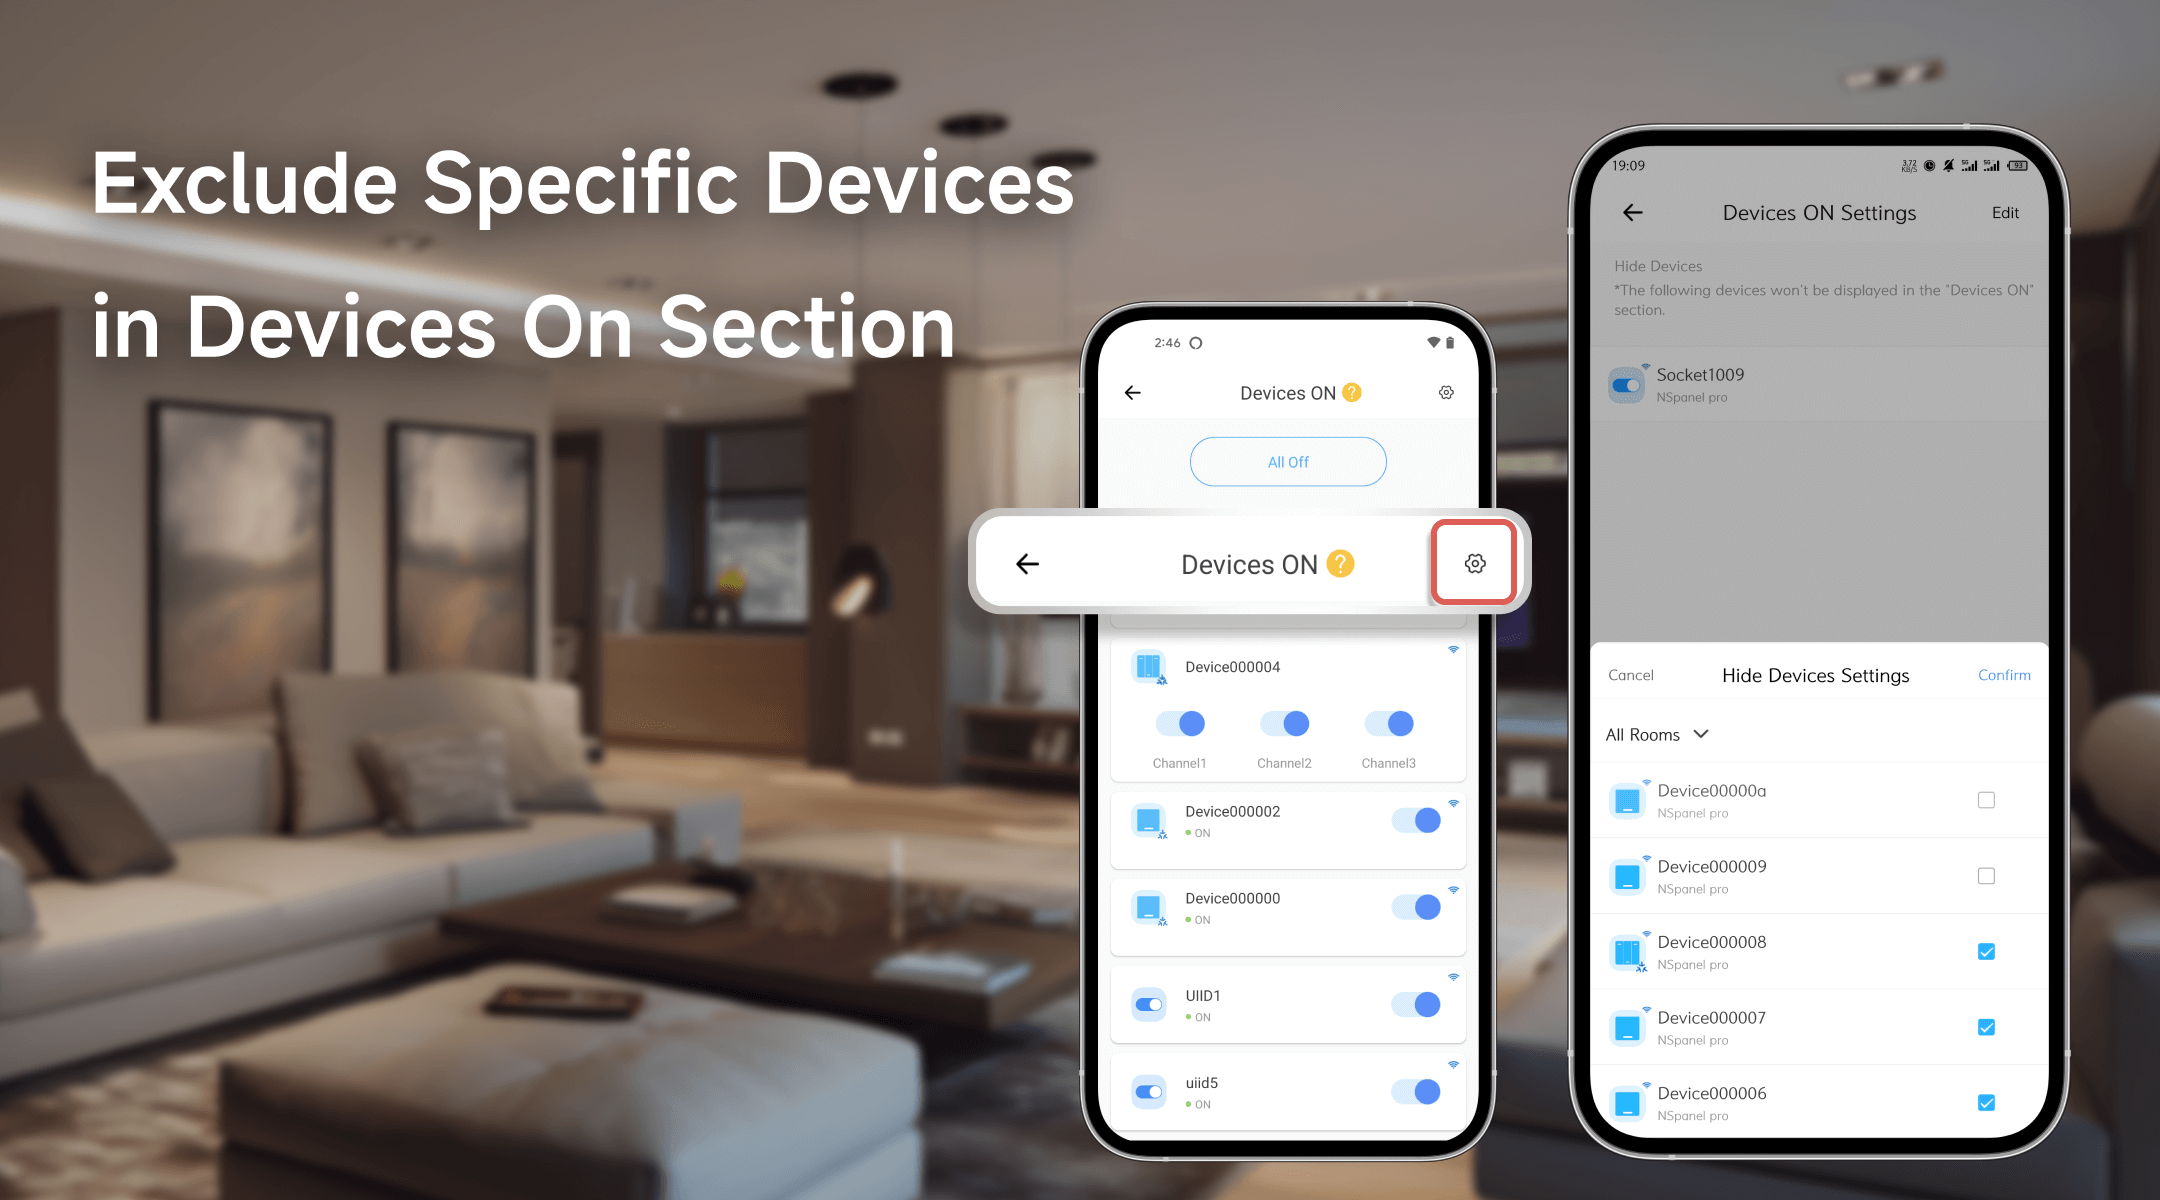 Exclude Specific Devices in Devices On Section